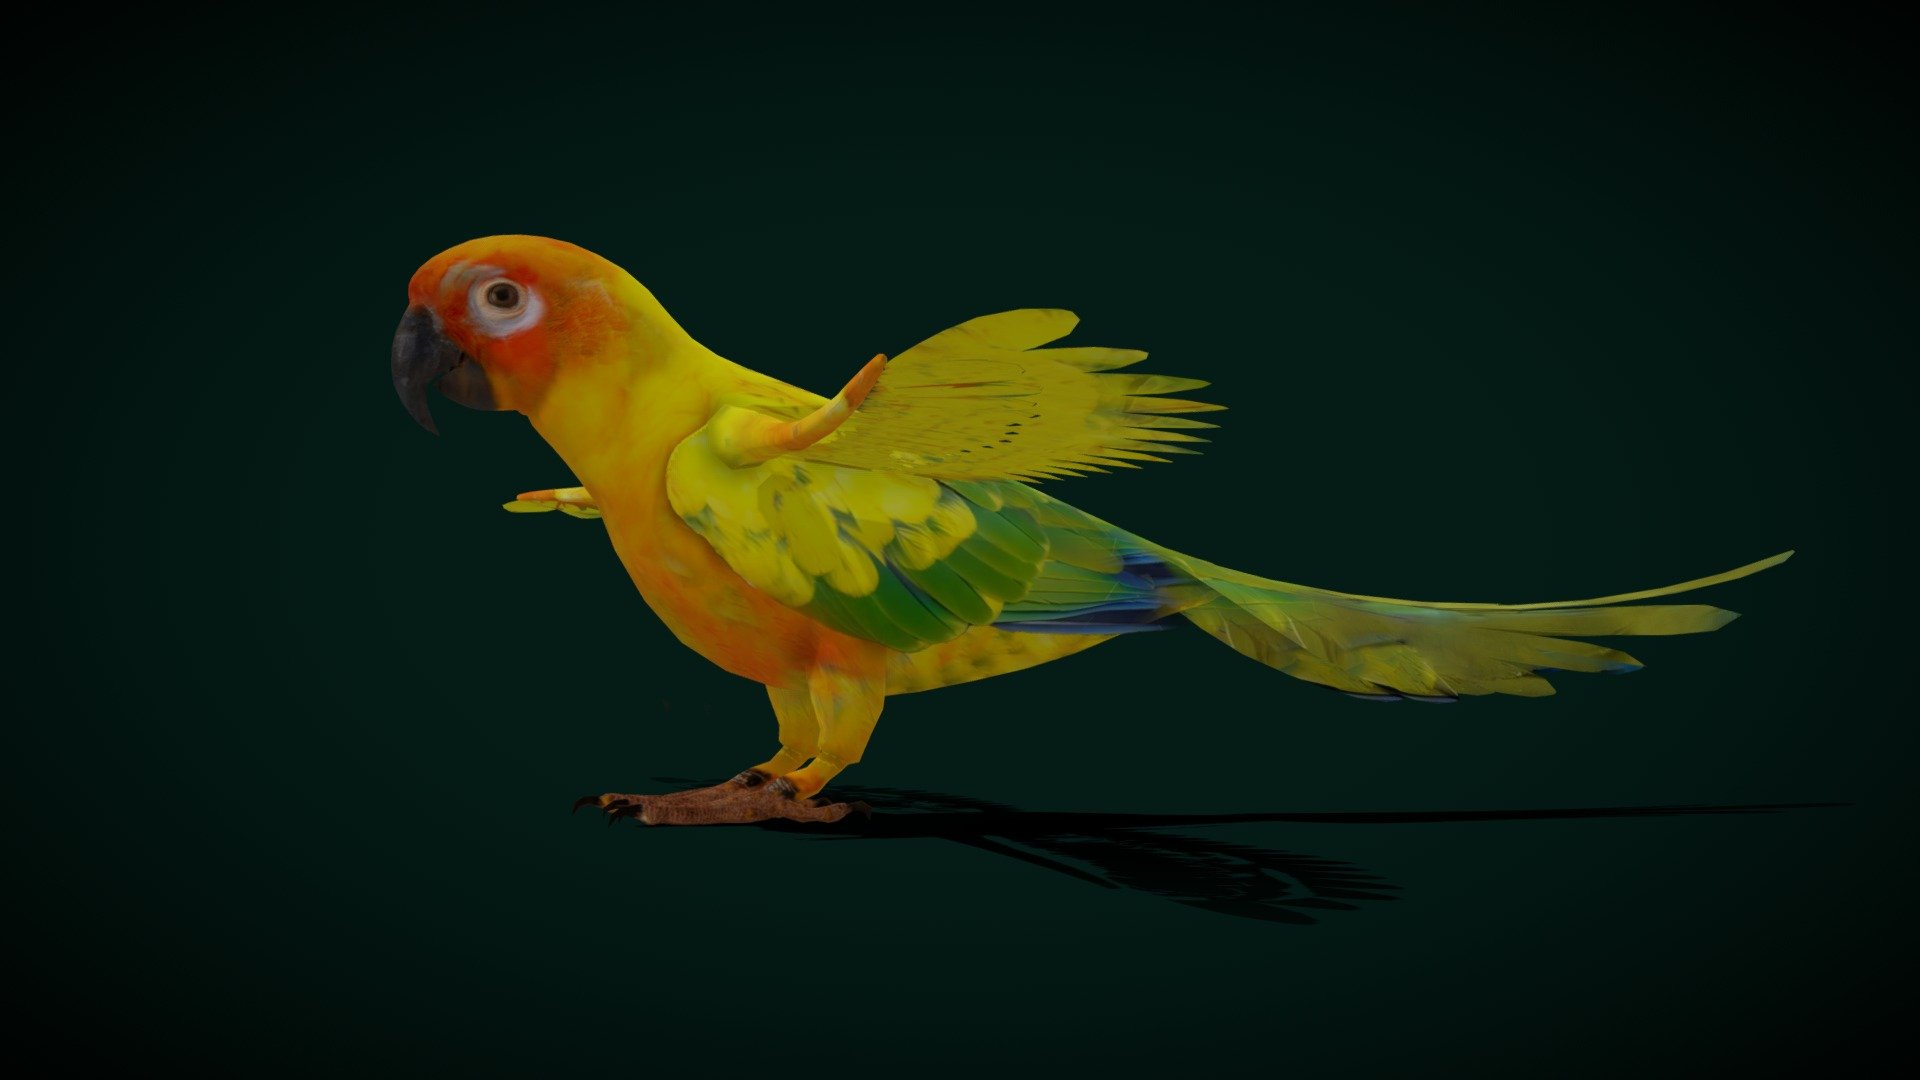 Sun Conures (Yellow parrot,Sun parakeet) Cute, Pet 

Aratinga solstitialis Animal Bird    (colored parrot)  

1 Draw Calls

Low Poly

4K PBR Textures Material

Blend File 

USDZ File (AR Ready). Real Scale Dimension

Textures Files

GLB File (Unreal 5.1  Plus Native Support)

Gltf File ( Spark AR, Lens Studio(SnapChat) , Effector(Tiktok) , Spline, Play Canvas,Omiverse ) Compatible

Triangles : 8460

Vertices  : 5361

Faces     : 4262

Edges     : 9499
 Diffuse, Metallic, Roughness , Normal Map ,Specular Map,AO
Sun Conures (Aratinga solstitialis) at the North Carolina Zoo in Asheboro, North Carolina. This species is listed as Endangered by the IUCN.
The sun conure, also known as the sun parakeet, is a medium-sized, vibrantly colored parrot native to northeastern South America. The adult male and female are similar in appearance, with black beaks, predominantly golden-yellow plumage, orange-flushed underparts and face, and green and blue-tipped wings and 
Scientific name: Aratinga solstitialis
 - Sun Conures Parakeet Bird (Endangered) - Buy Royalty Free 3D model by Nyilonelycompany 3d model